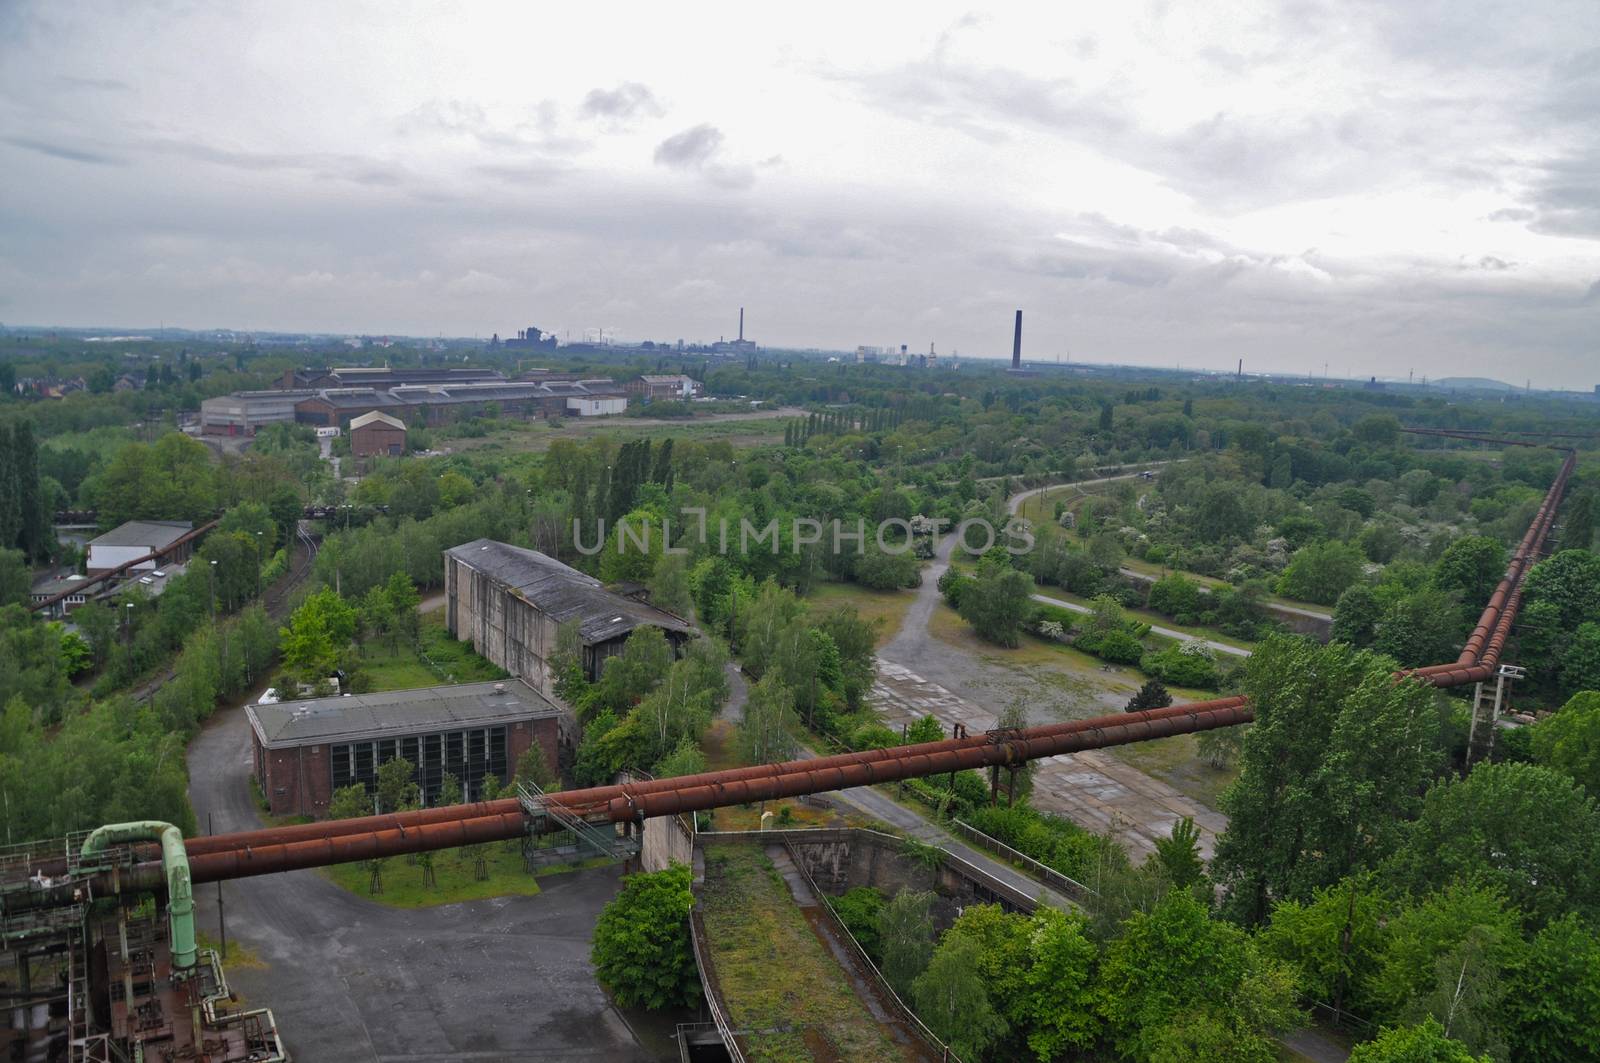 View on former industry in Duisburg, Germany.